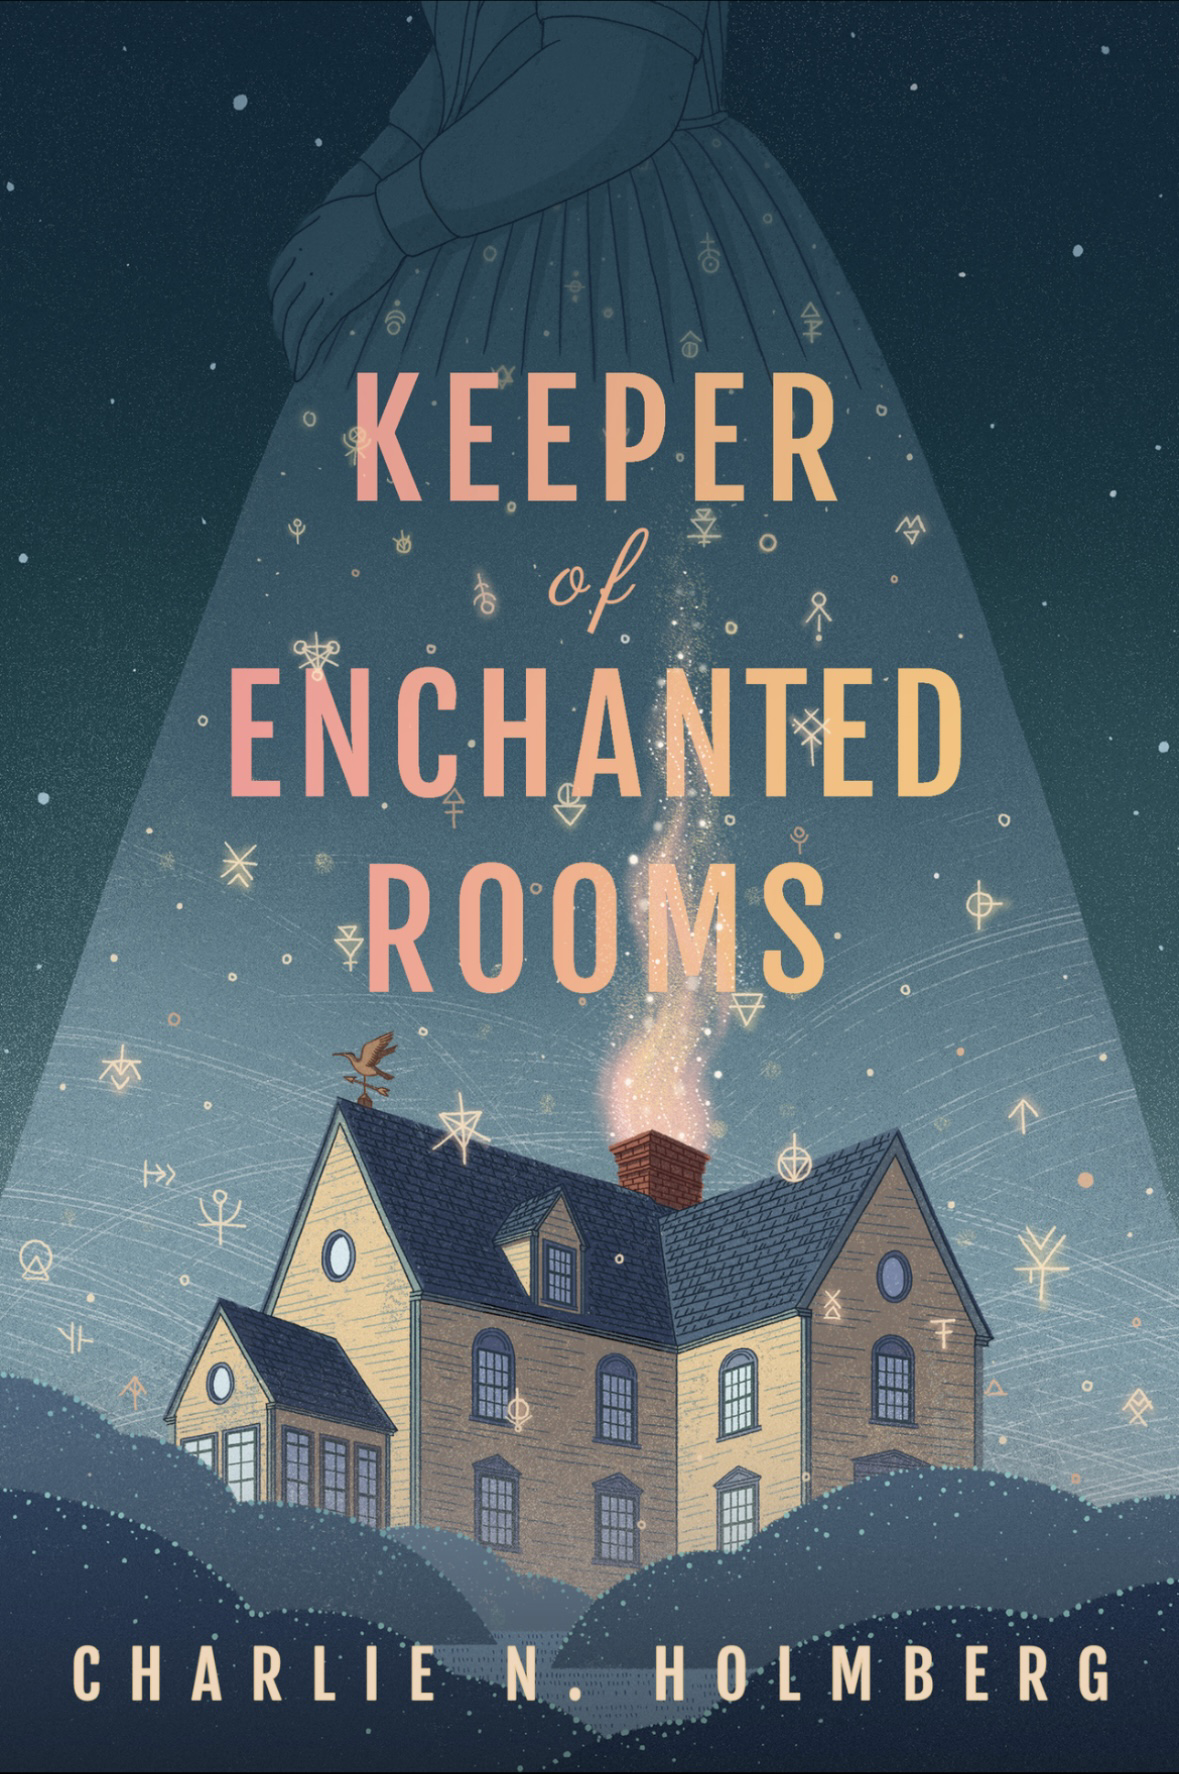 The cover of Keeper of Enchanted Rooms. An illustrstion of a colonial-style house imposed upon the silhouette of a woman in a 19th-century dress.